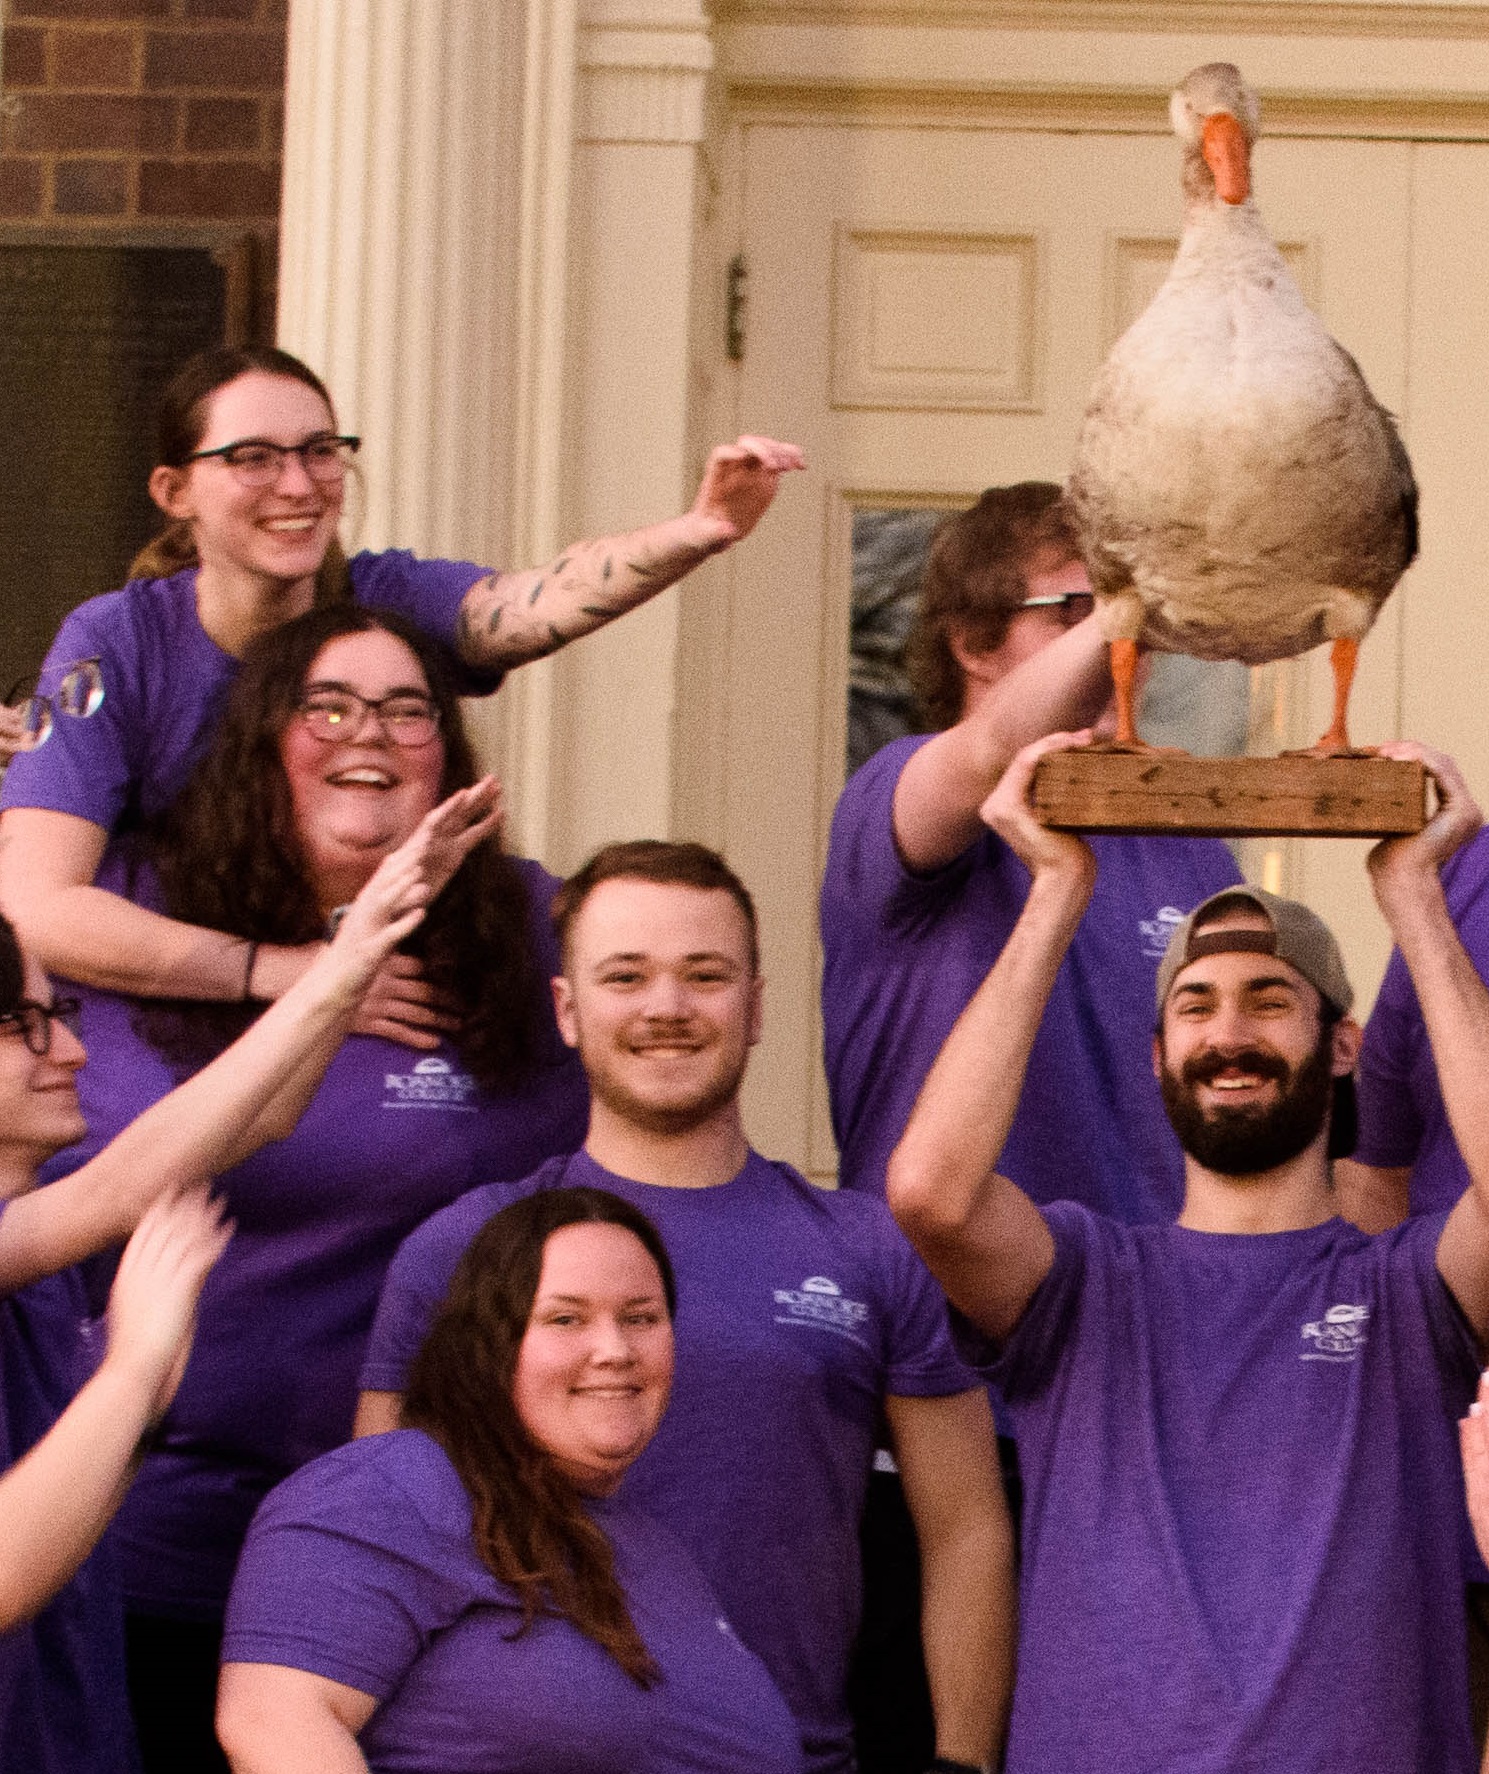 Resident advisors laugh as one holds a stuffed goose up over his head in a triumphant gesture